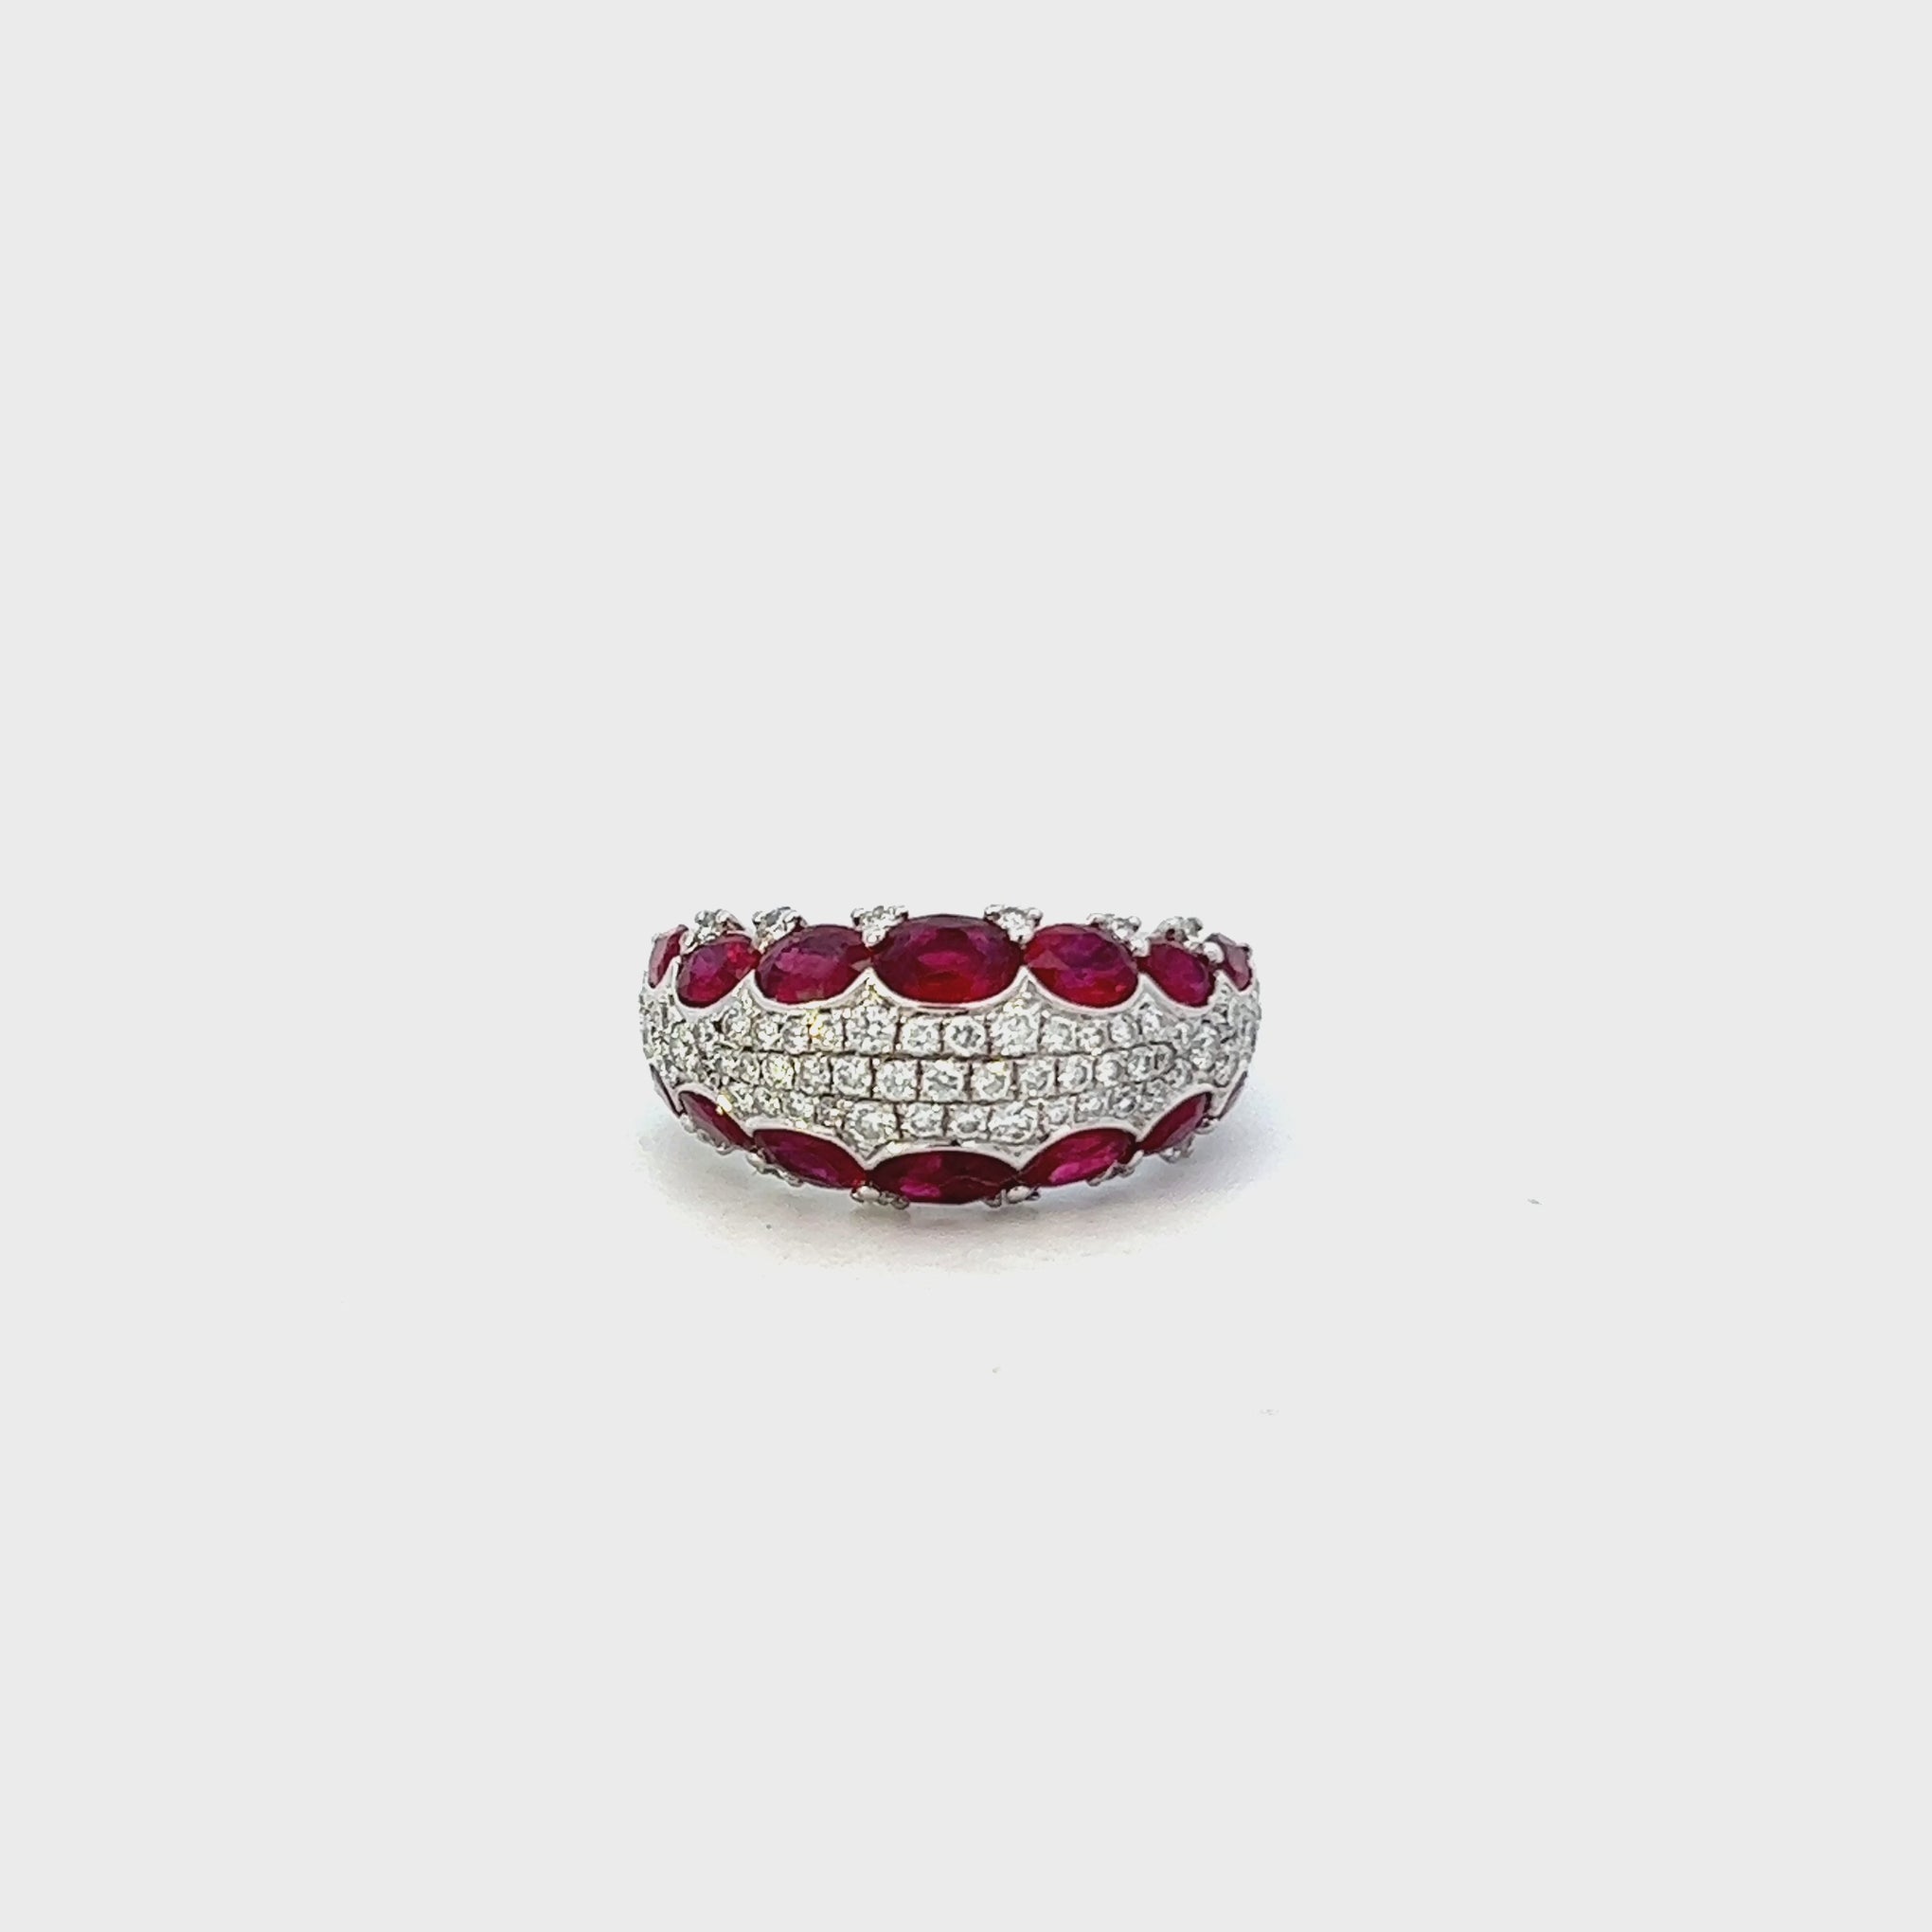 18KT WHITE GOLD RUBY AND PAVE' DIAMOND RING